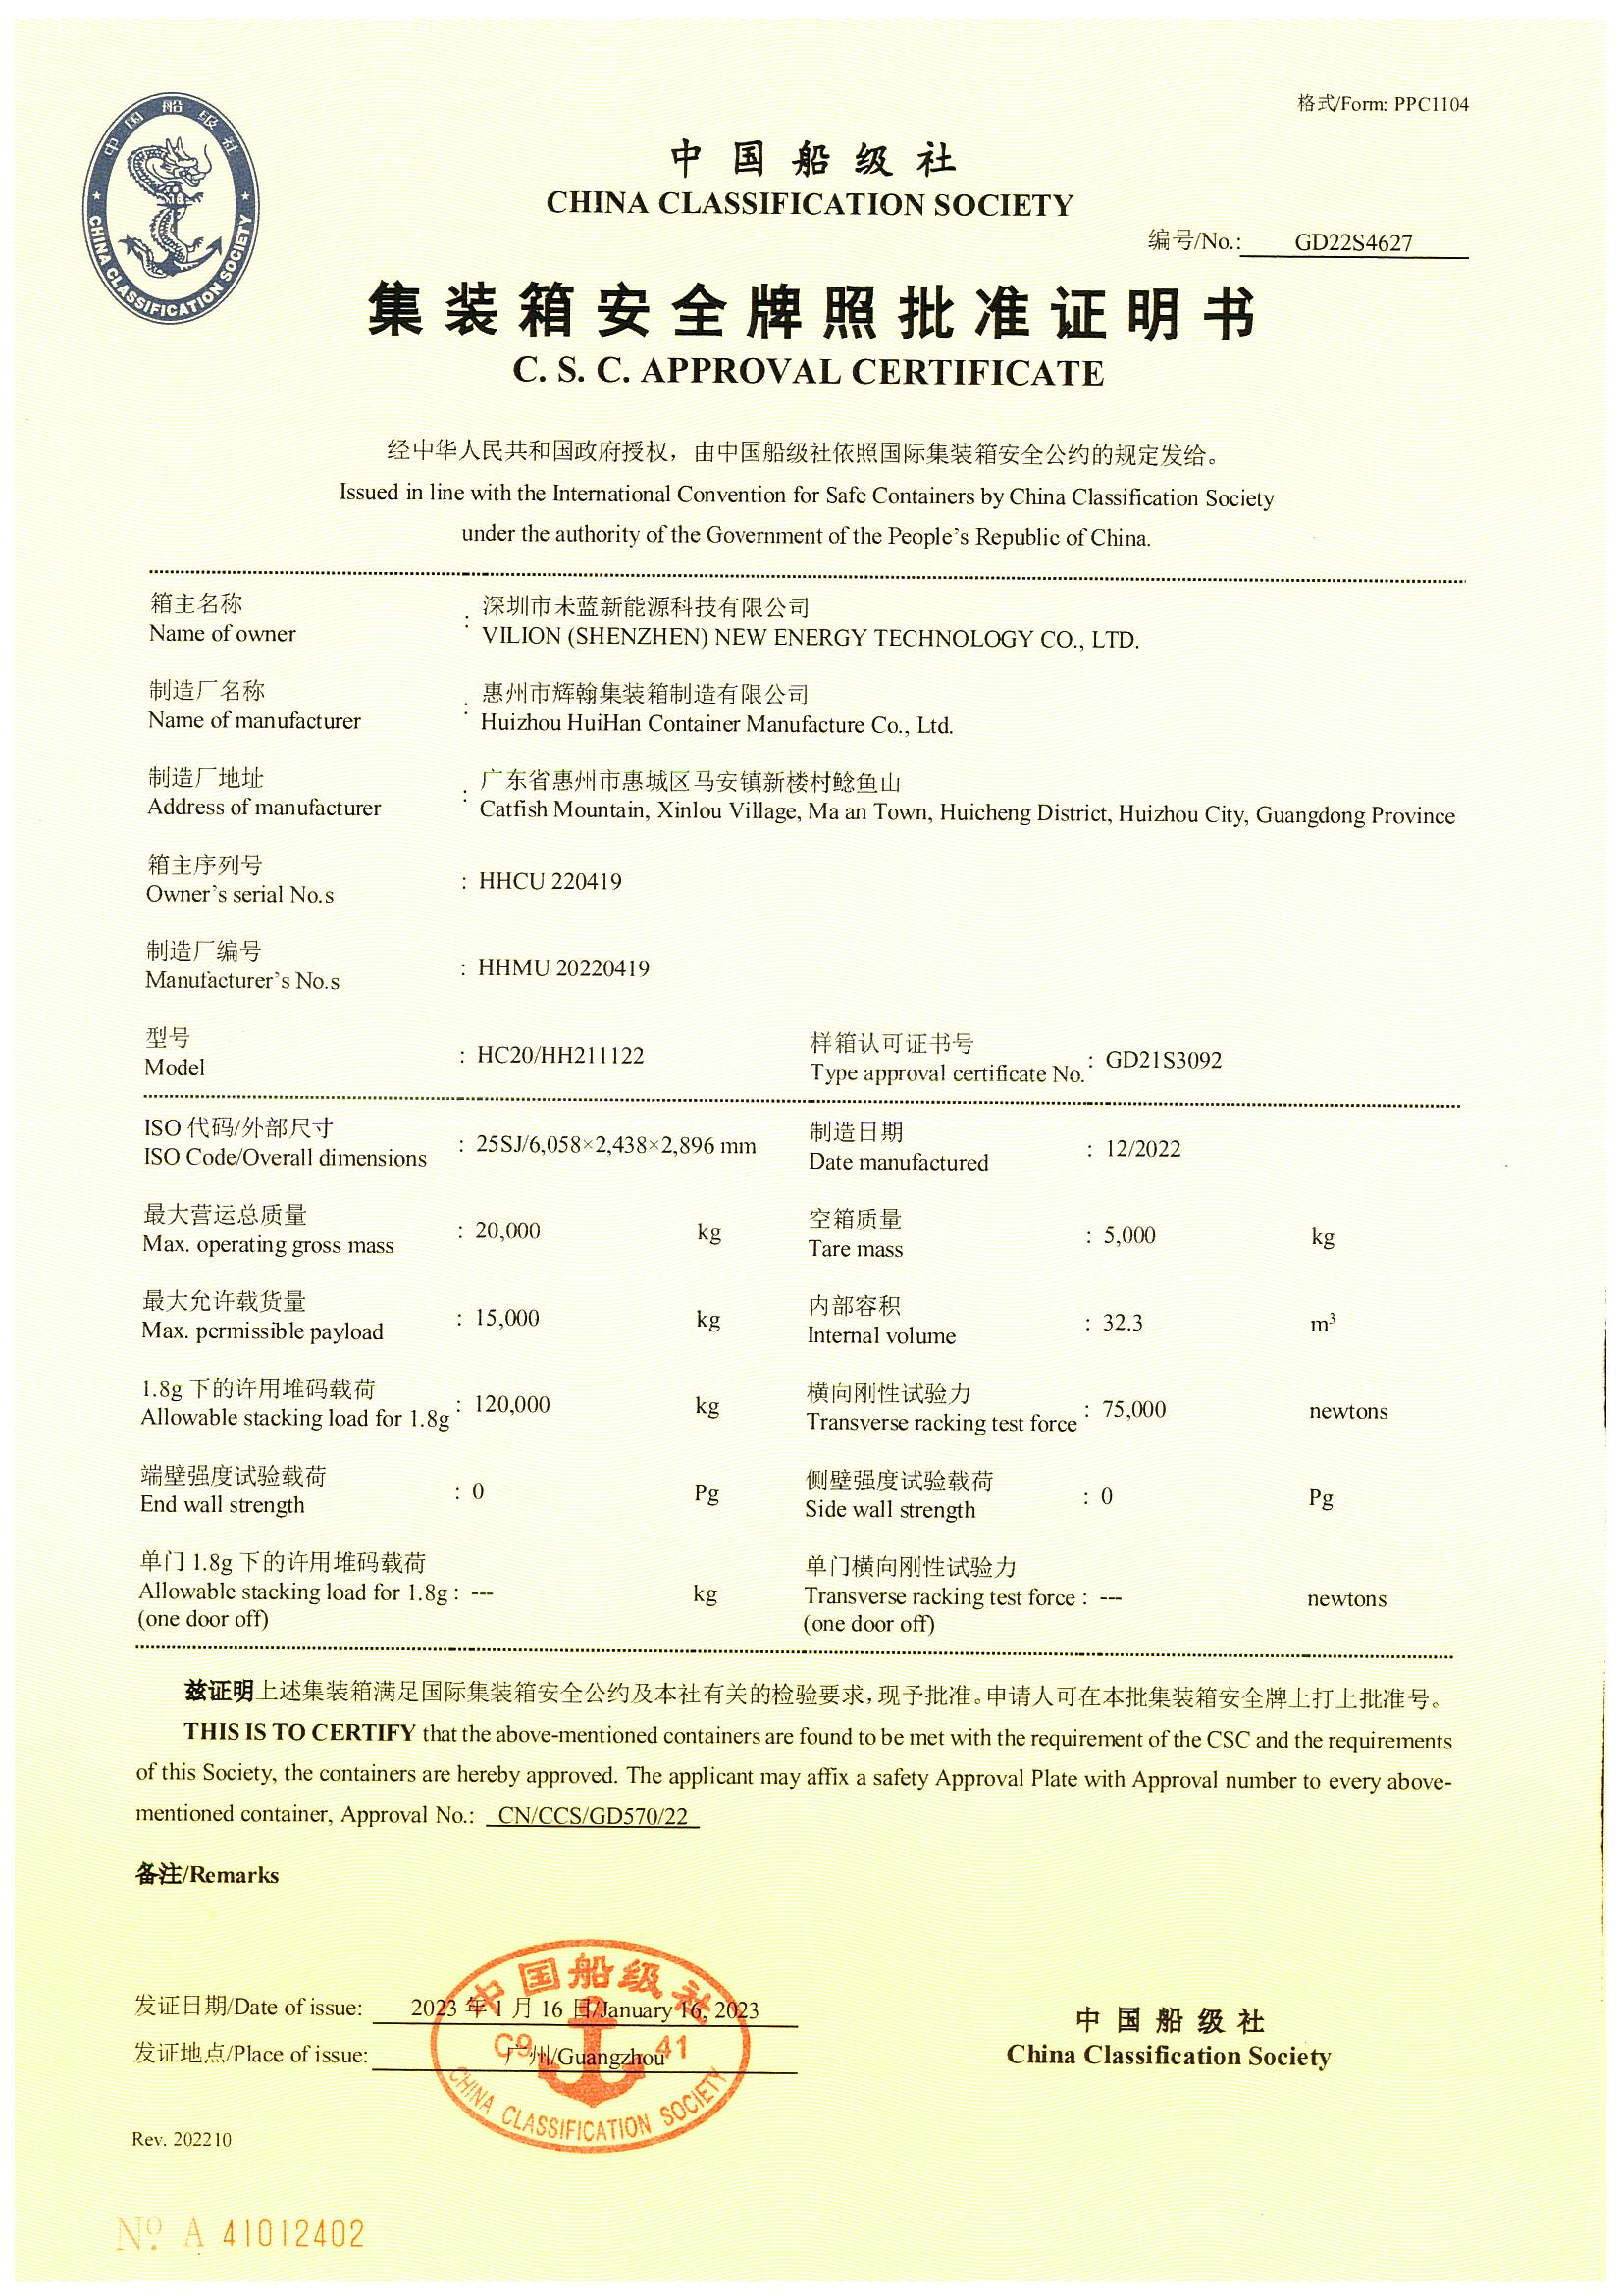 PRODUCTS CERTIFICATES